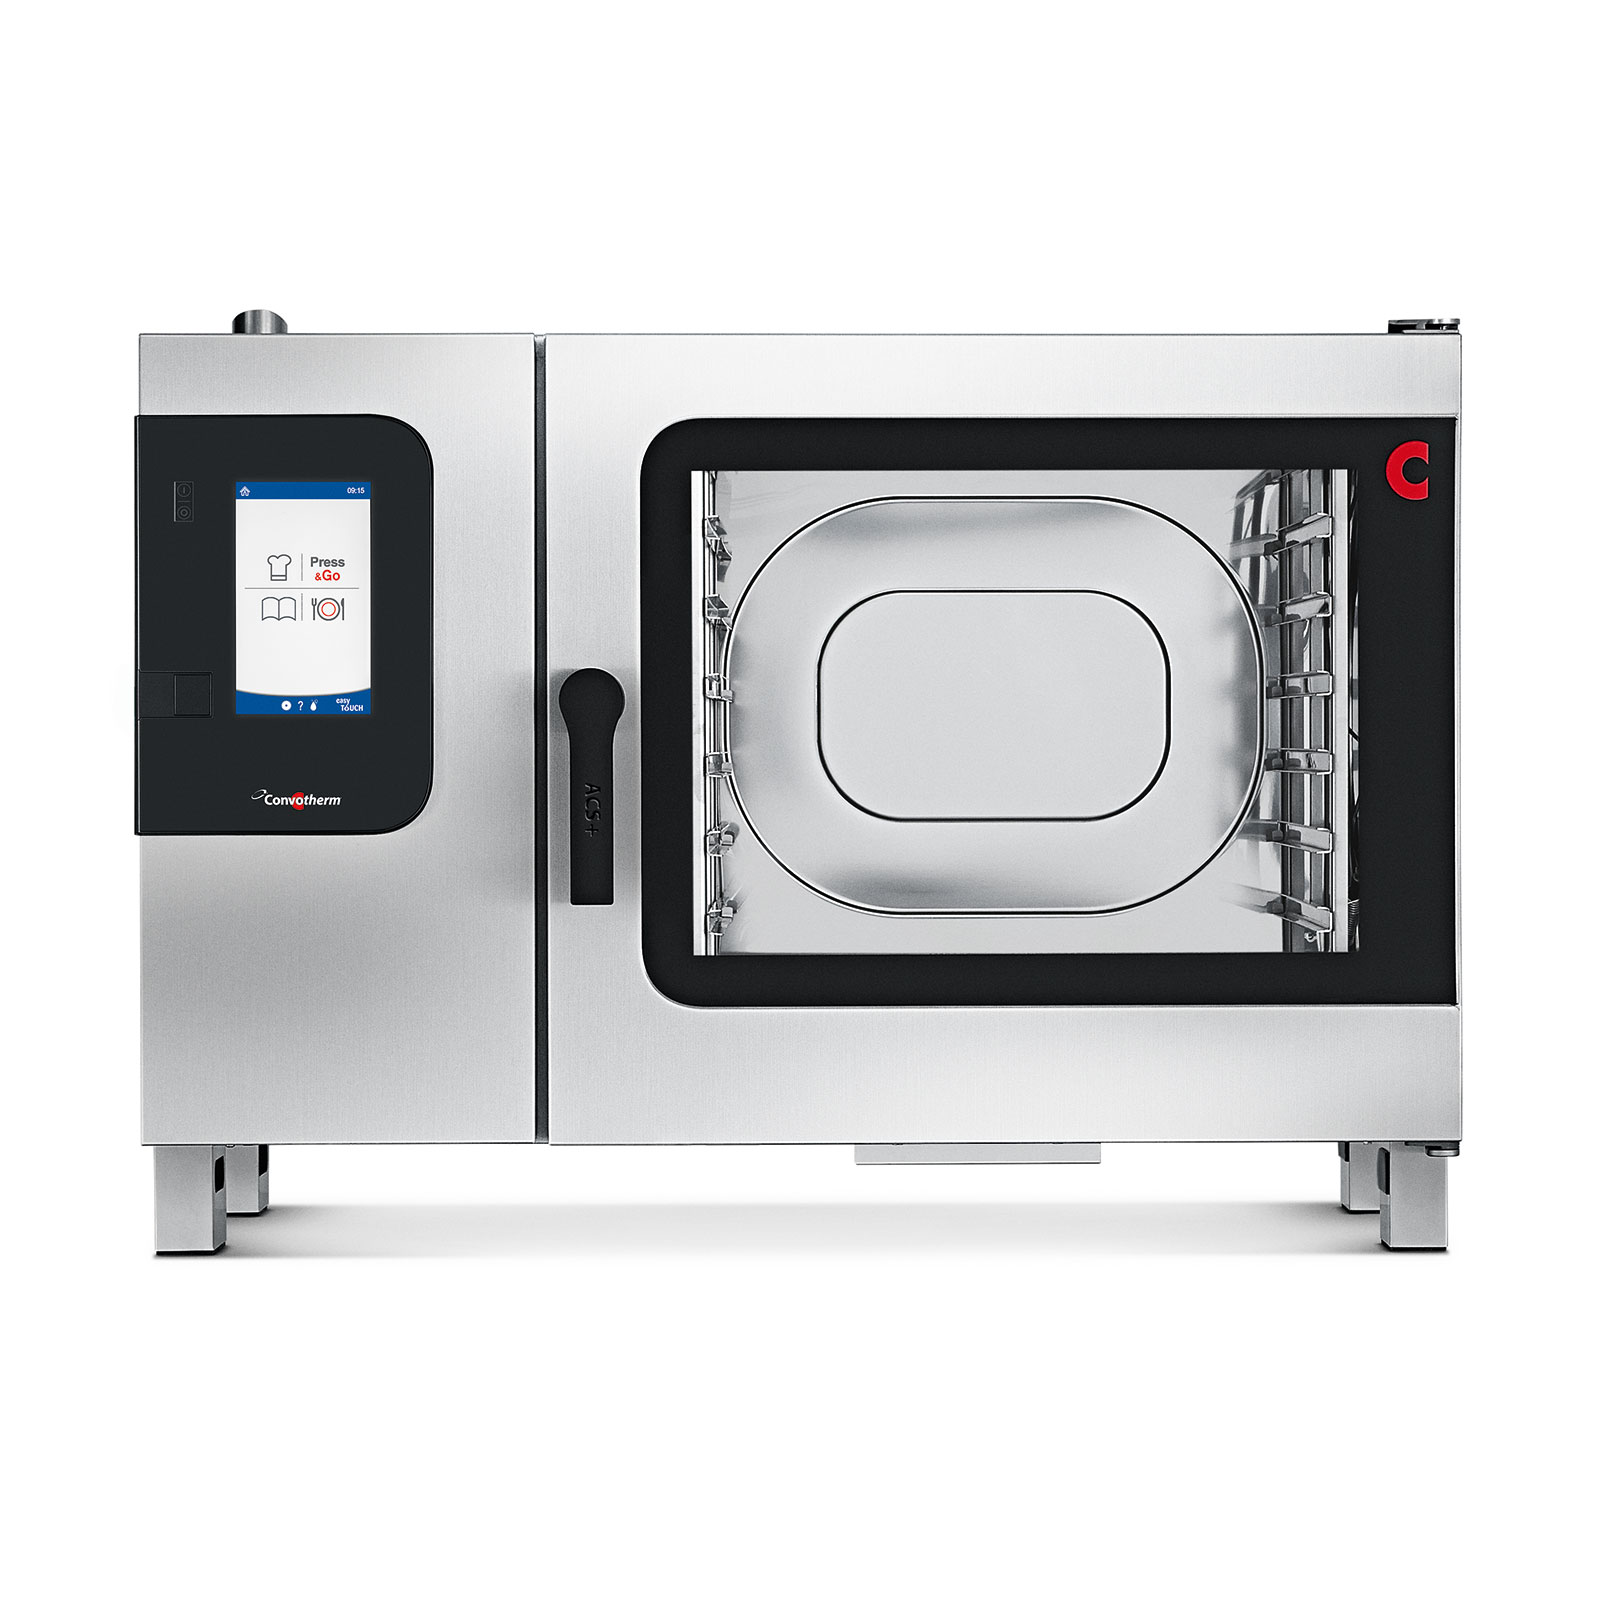 Convotherm C4ET6.20EB DD Full-Size Electric Combi Oven w/ Programmable Controls, Steam Generator, 208-240v